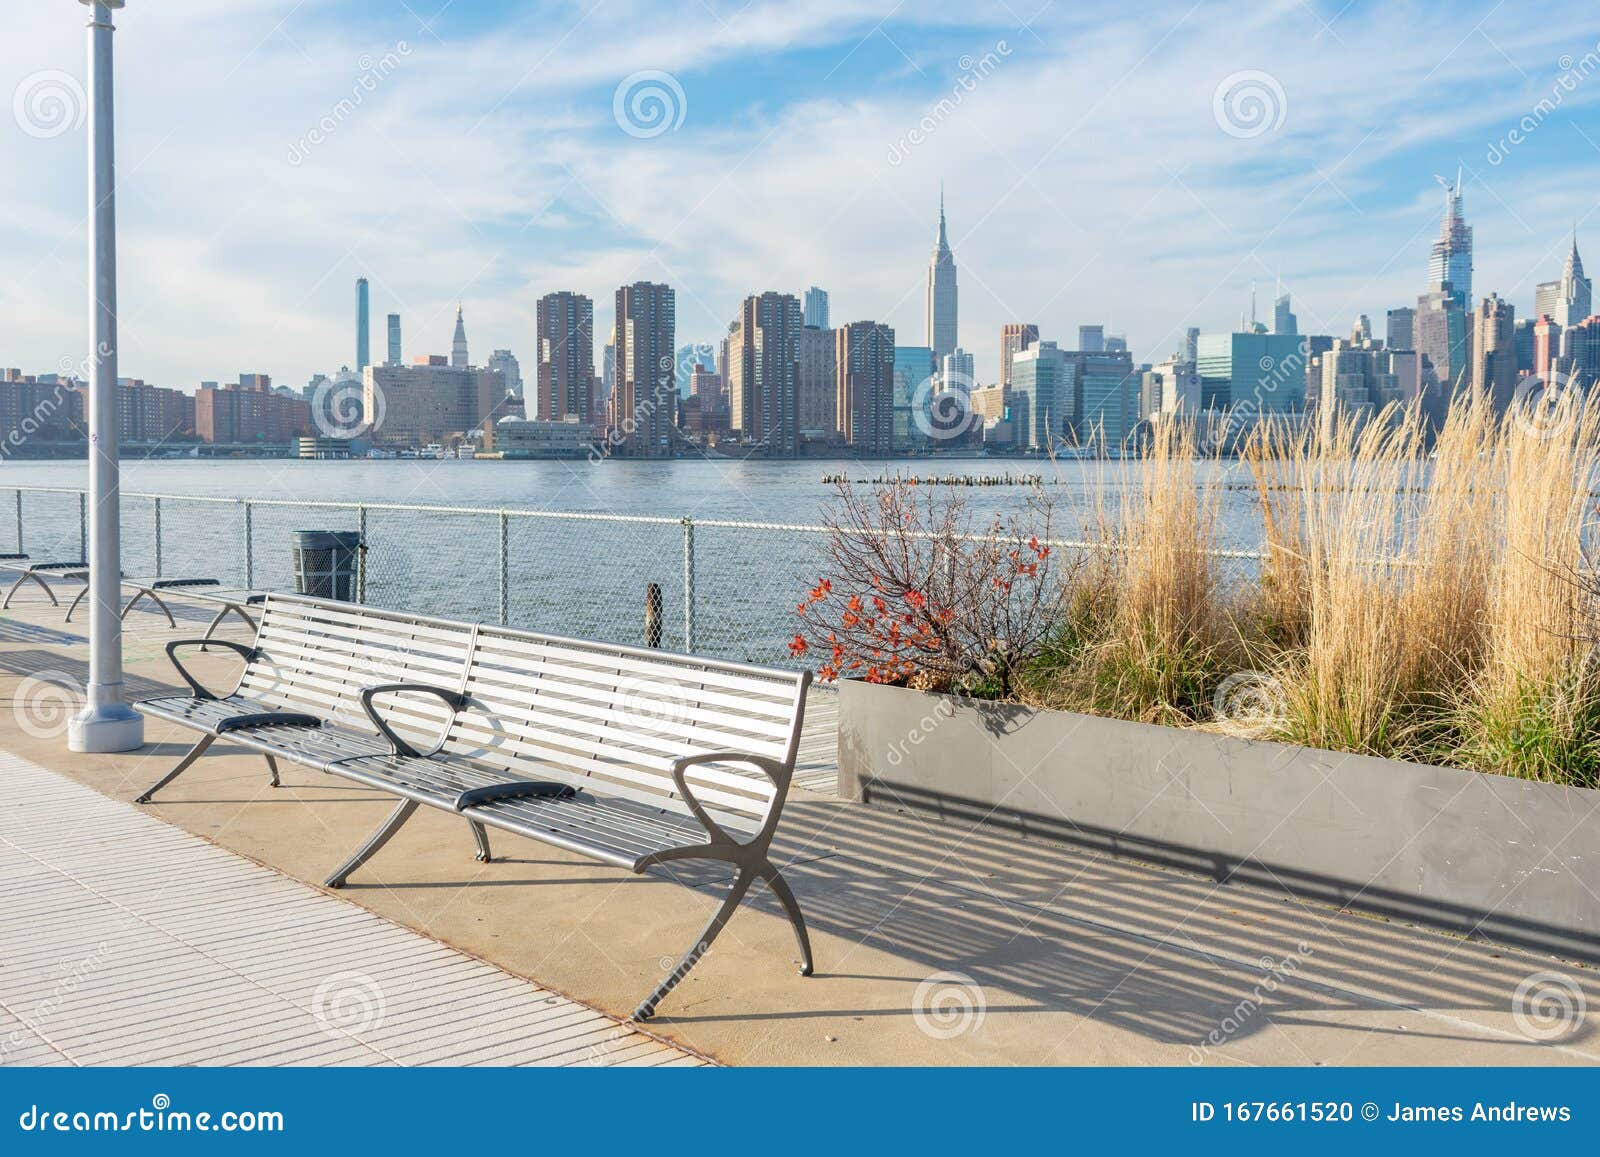 empty bench with plants at a park in greenpoint brooklyn new york looking out towards the east river and the manhattan skyline